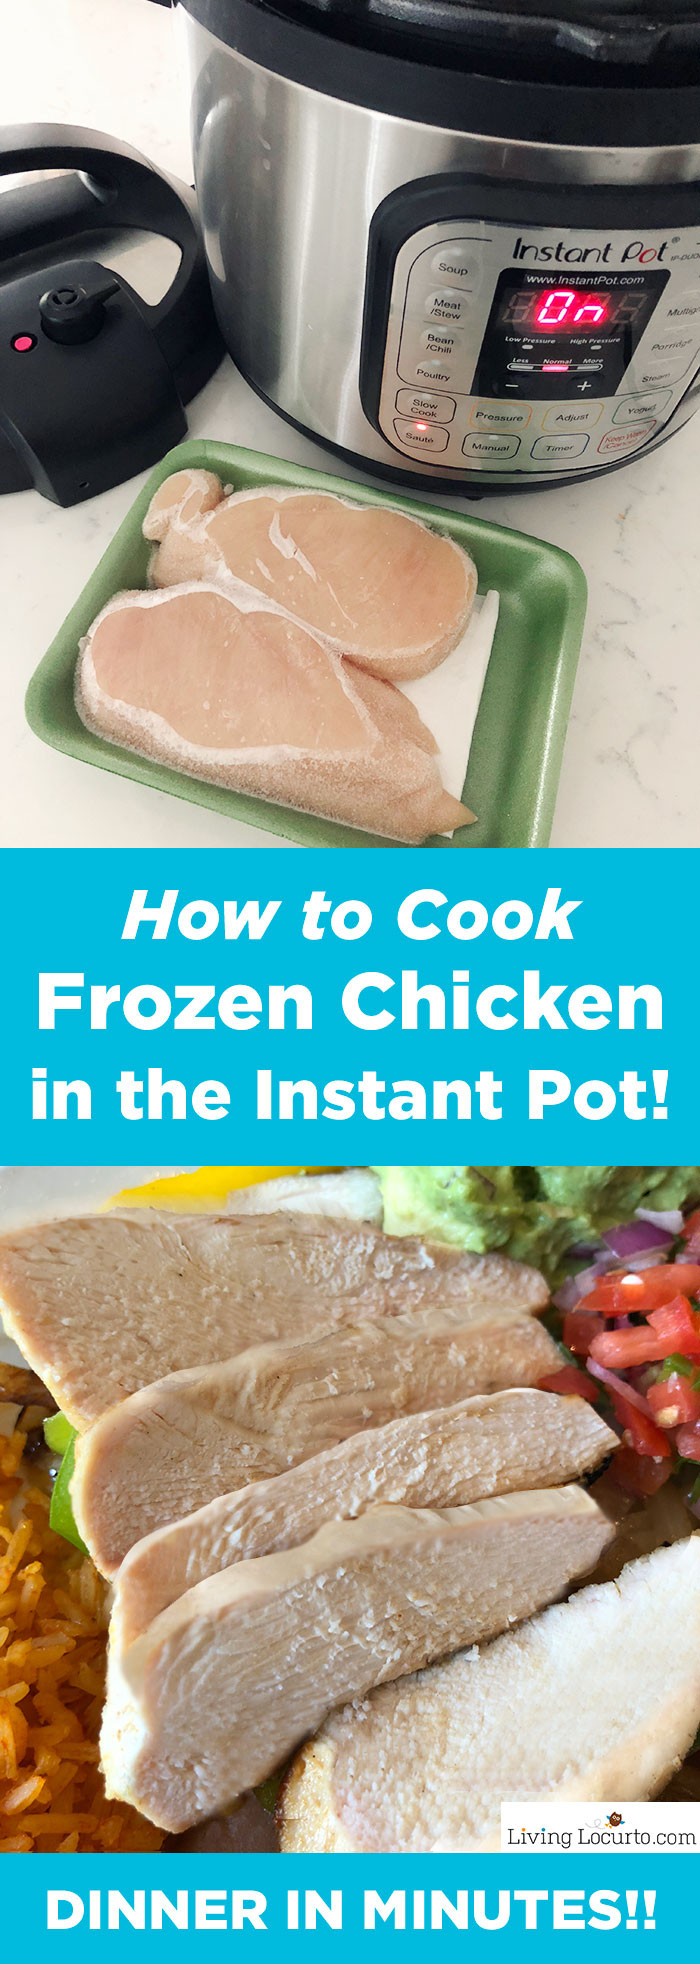 Instant Pot Frozen Chicken Recipes
 How to Cook Frozen Chicken Breasts in Instant Pot Pressure